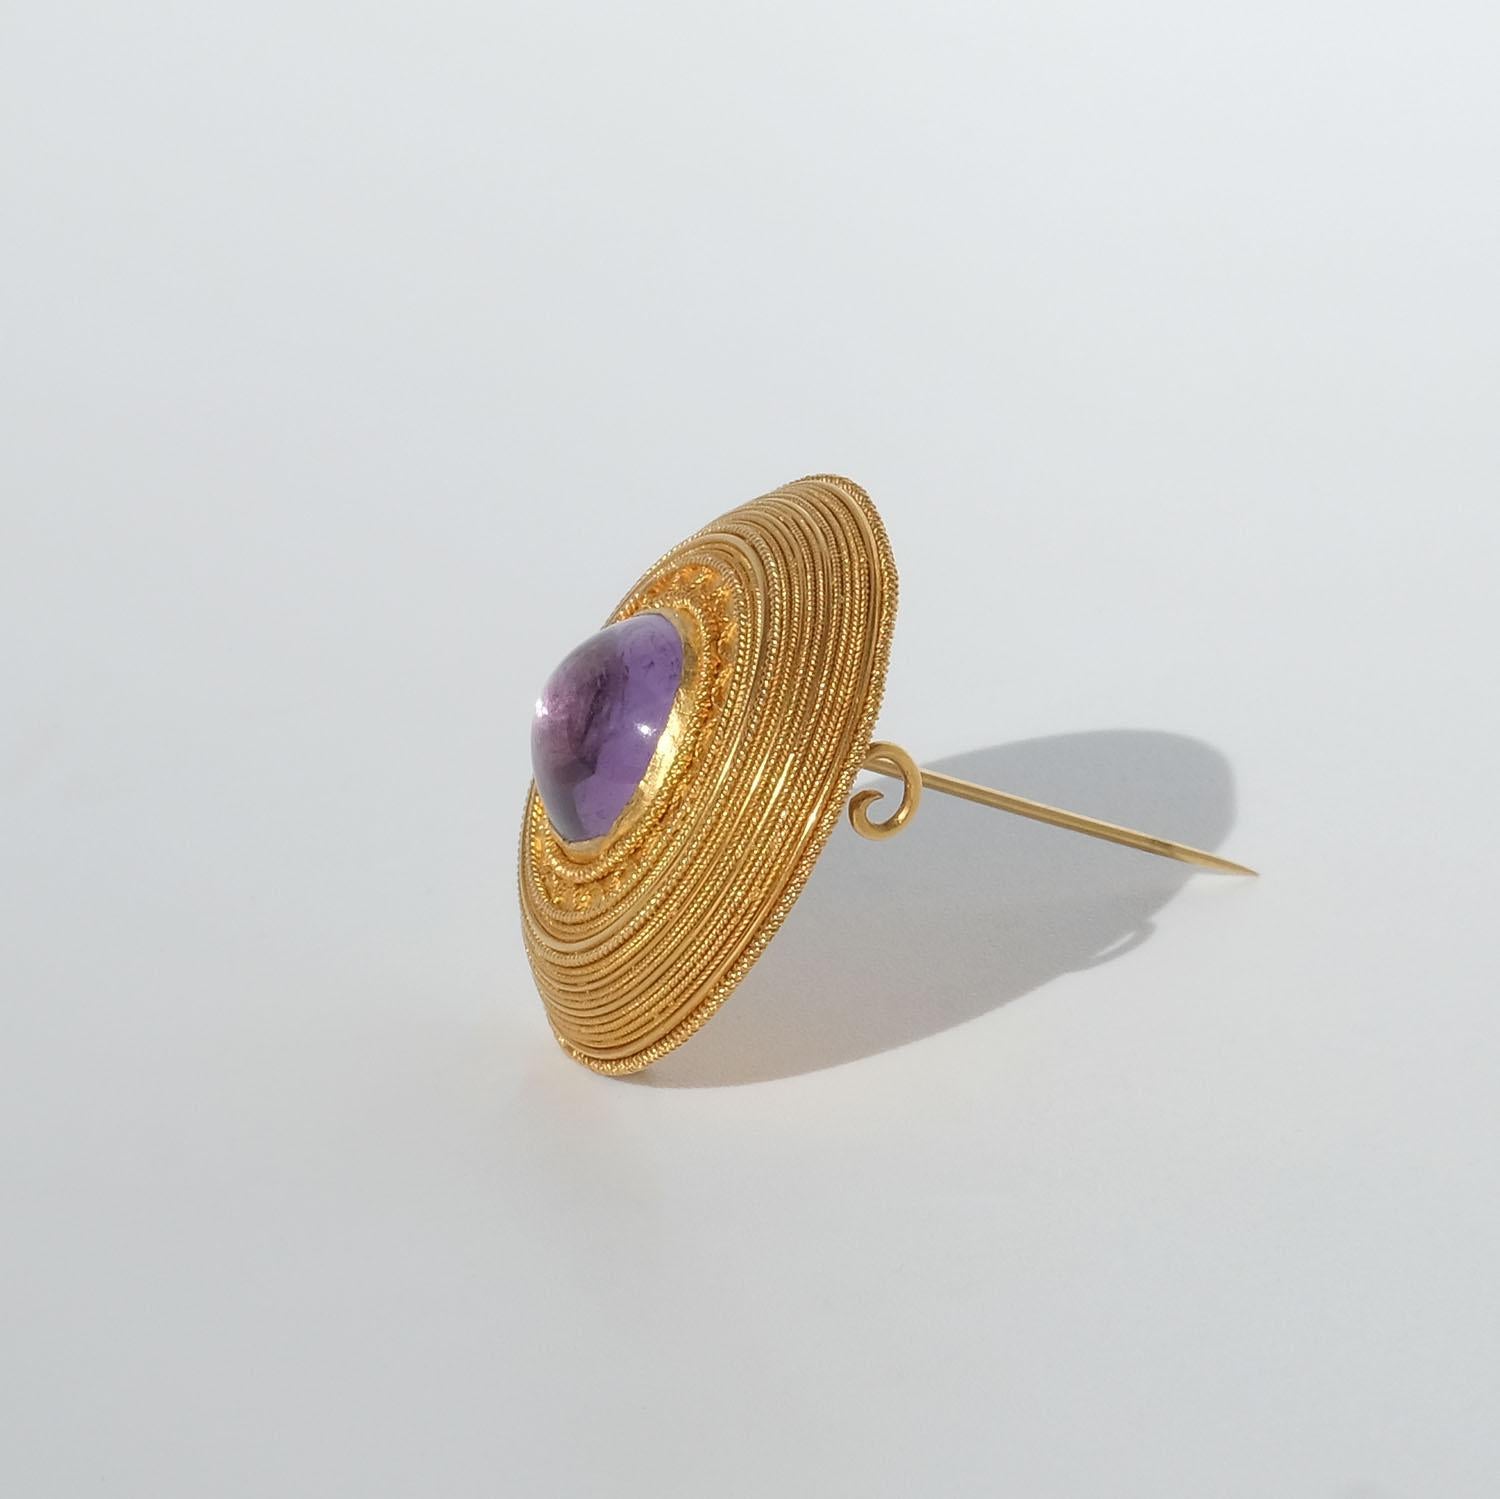 Antique 18k Gold and Amethyst Brooch/Pendant by Gustaf Möllenborg Made Year 1863 In Good Condition For Sale In Stockholm, SE